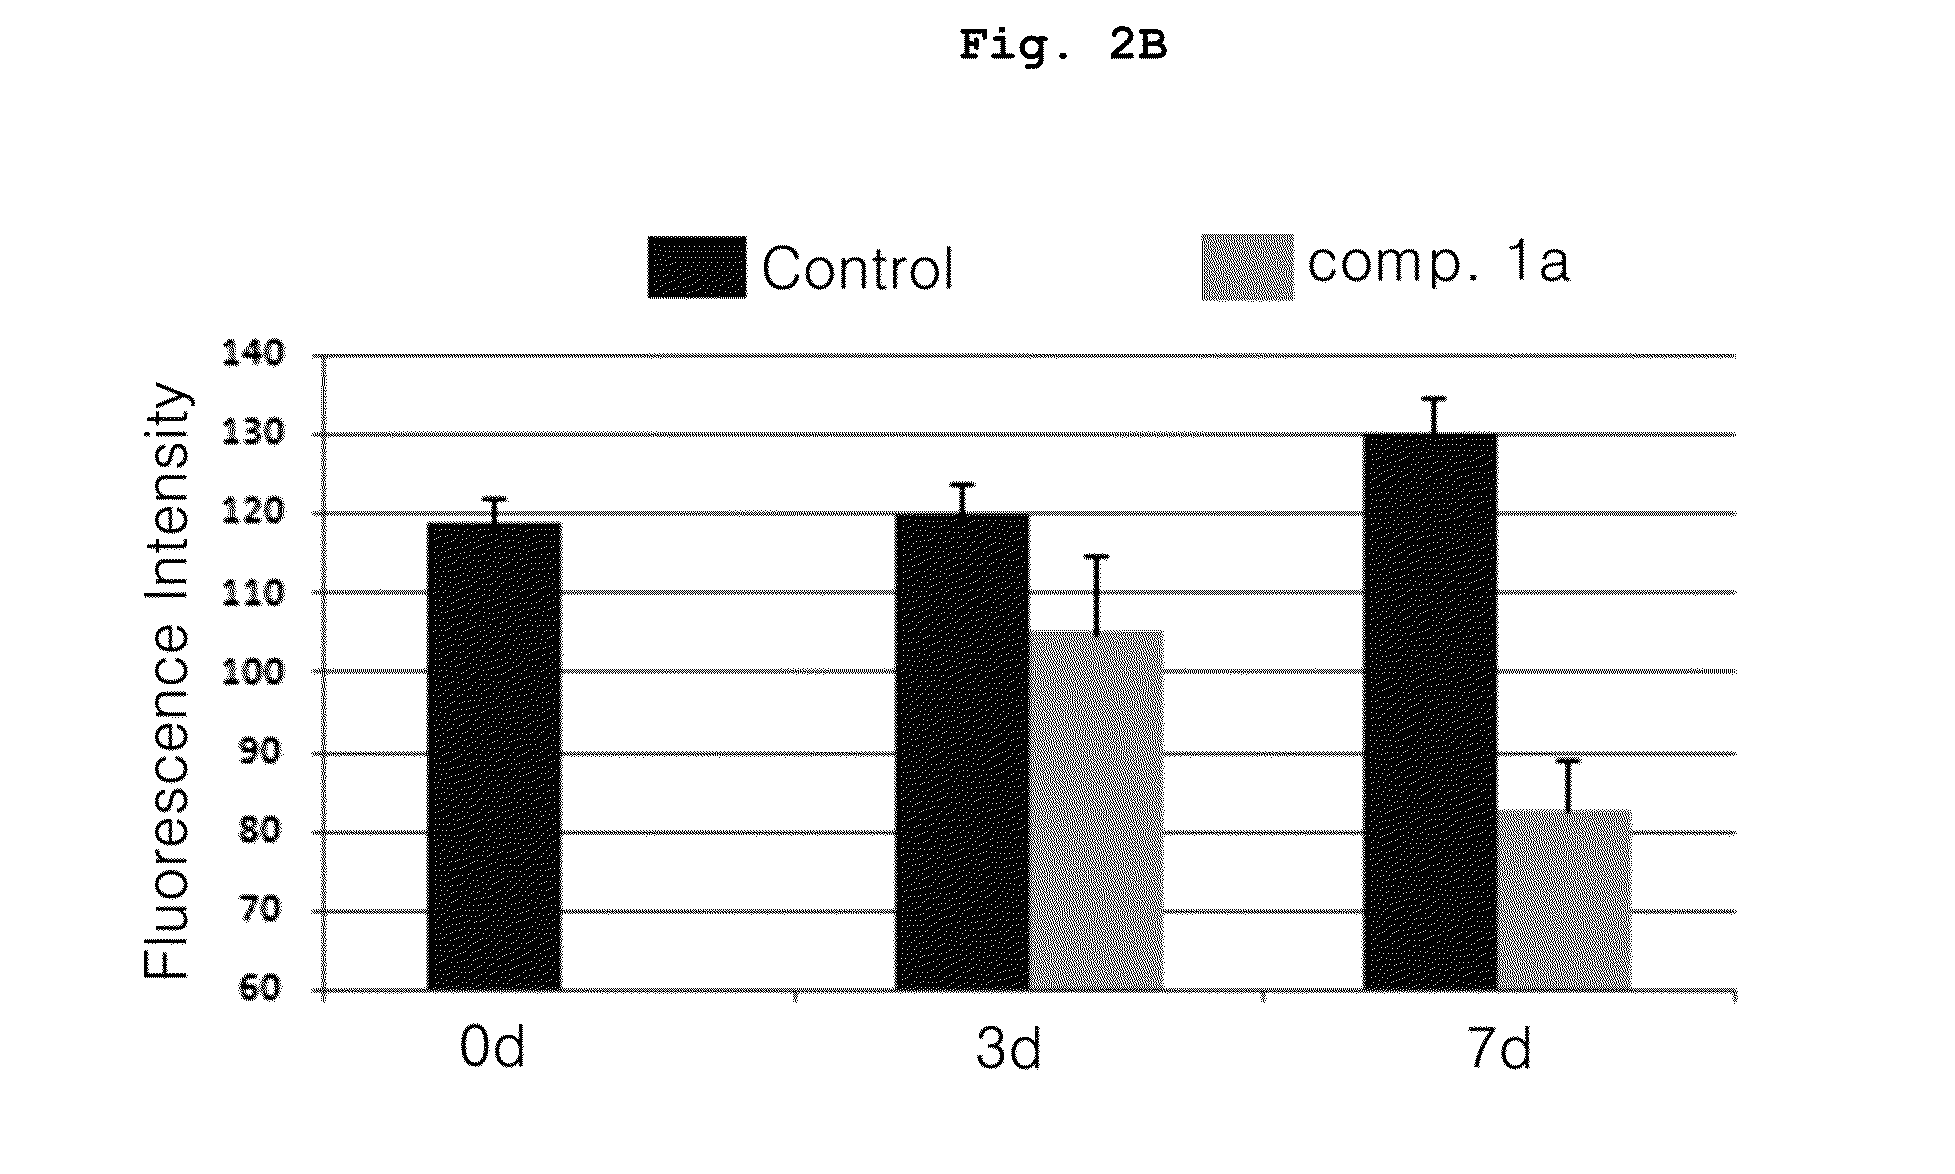 Pharmaceutical composition for preventing or treating diseases associated with beta-amyloid accumulation containing morpholin or piperazine based compounds having so3h or cooh as active ingredient